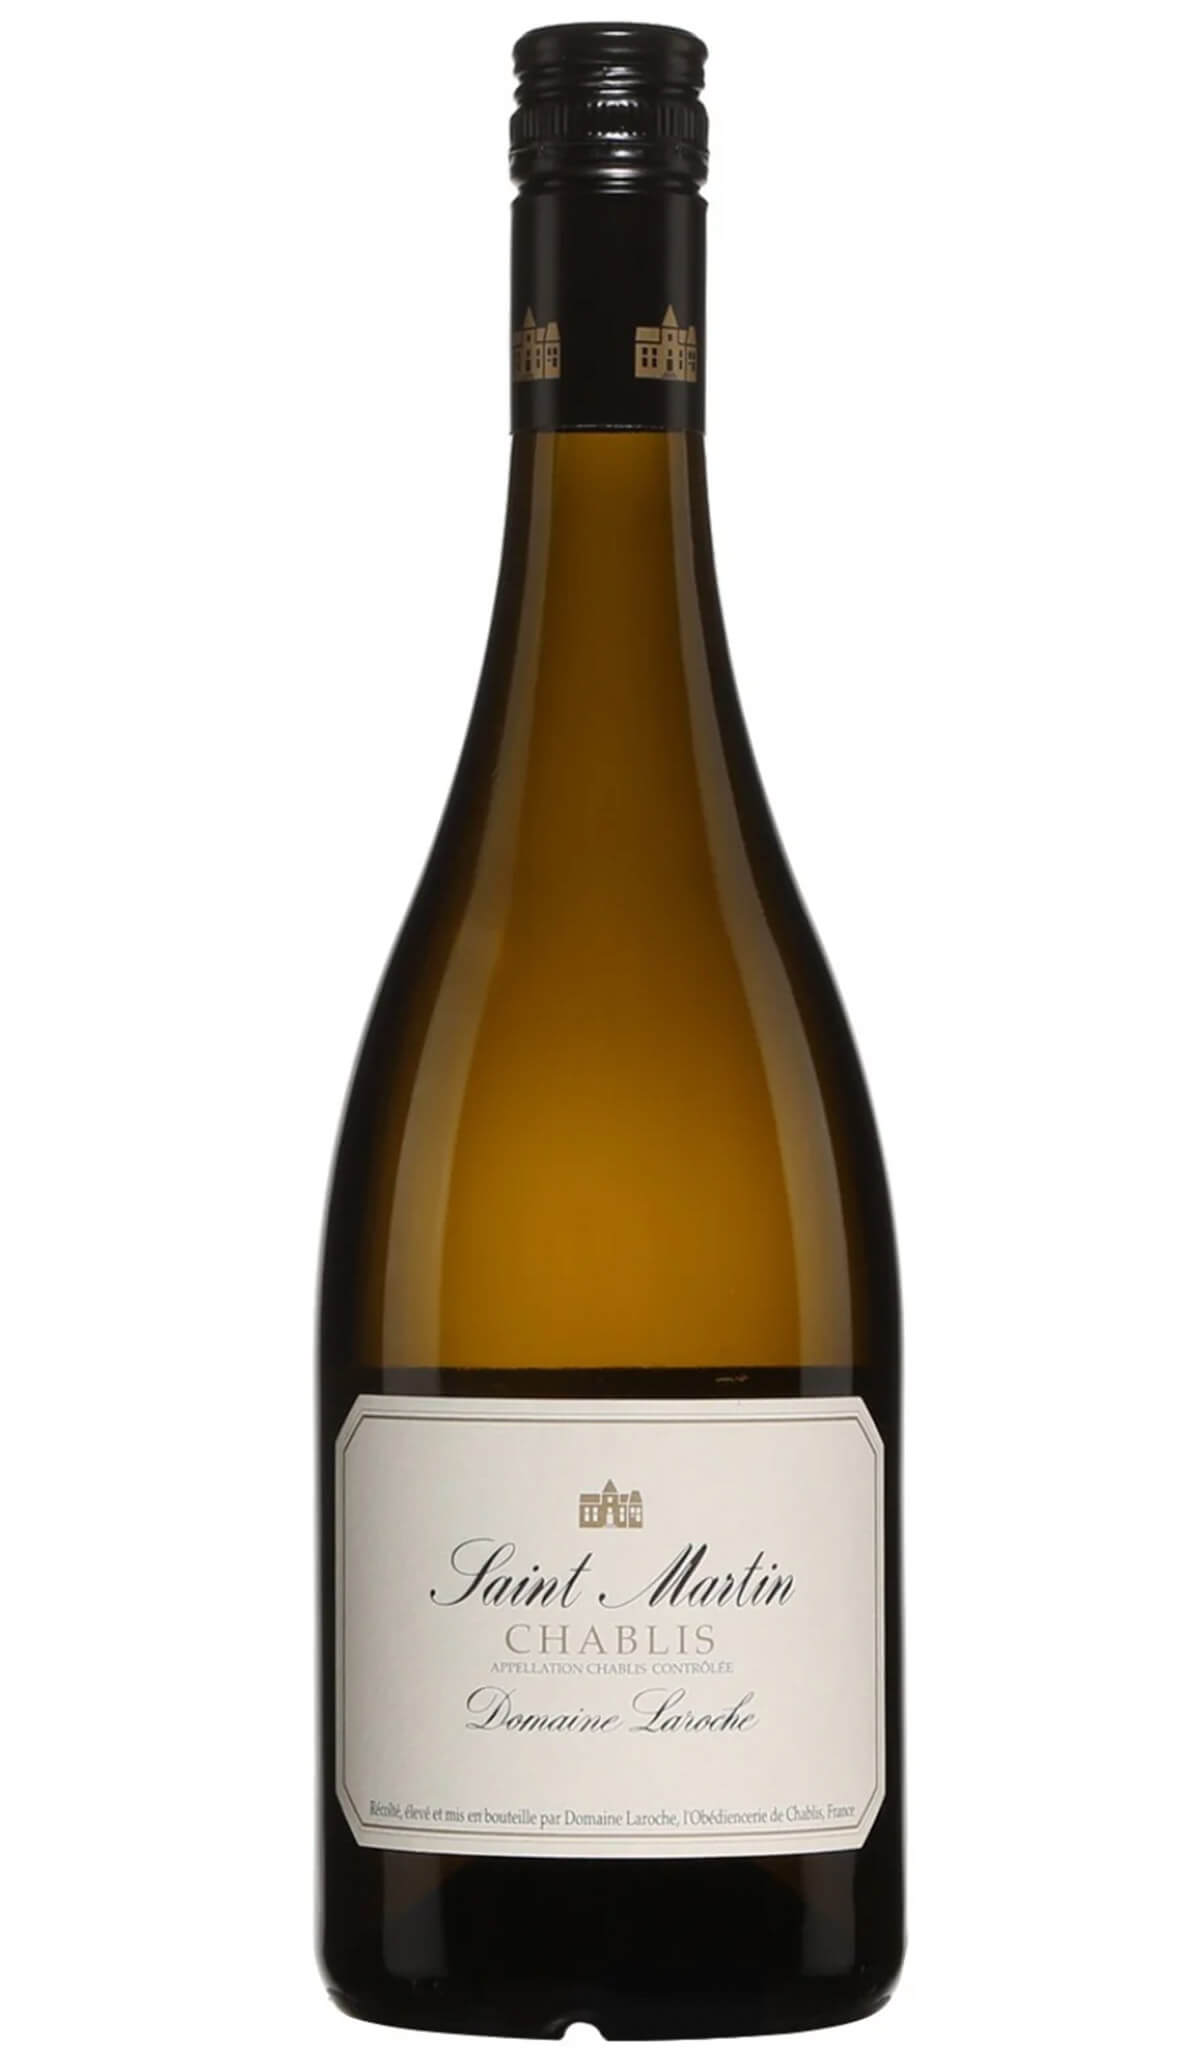 Find out more, explore the range and purchase Domaine Laroche Saint Martin Chablis 2022 (France) available online at Wine Sellers Direct - Australia's independent liquor specialists.